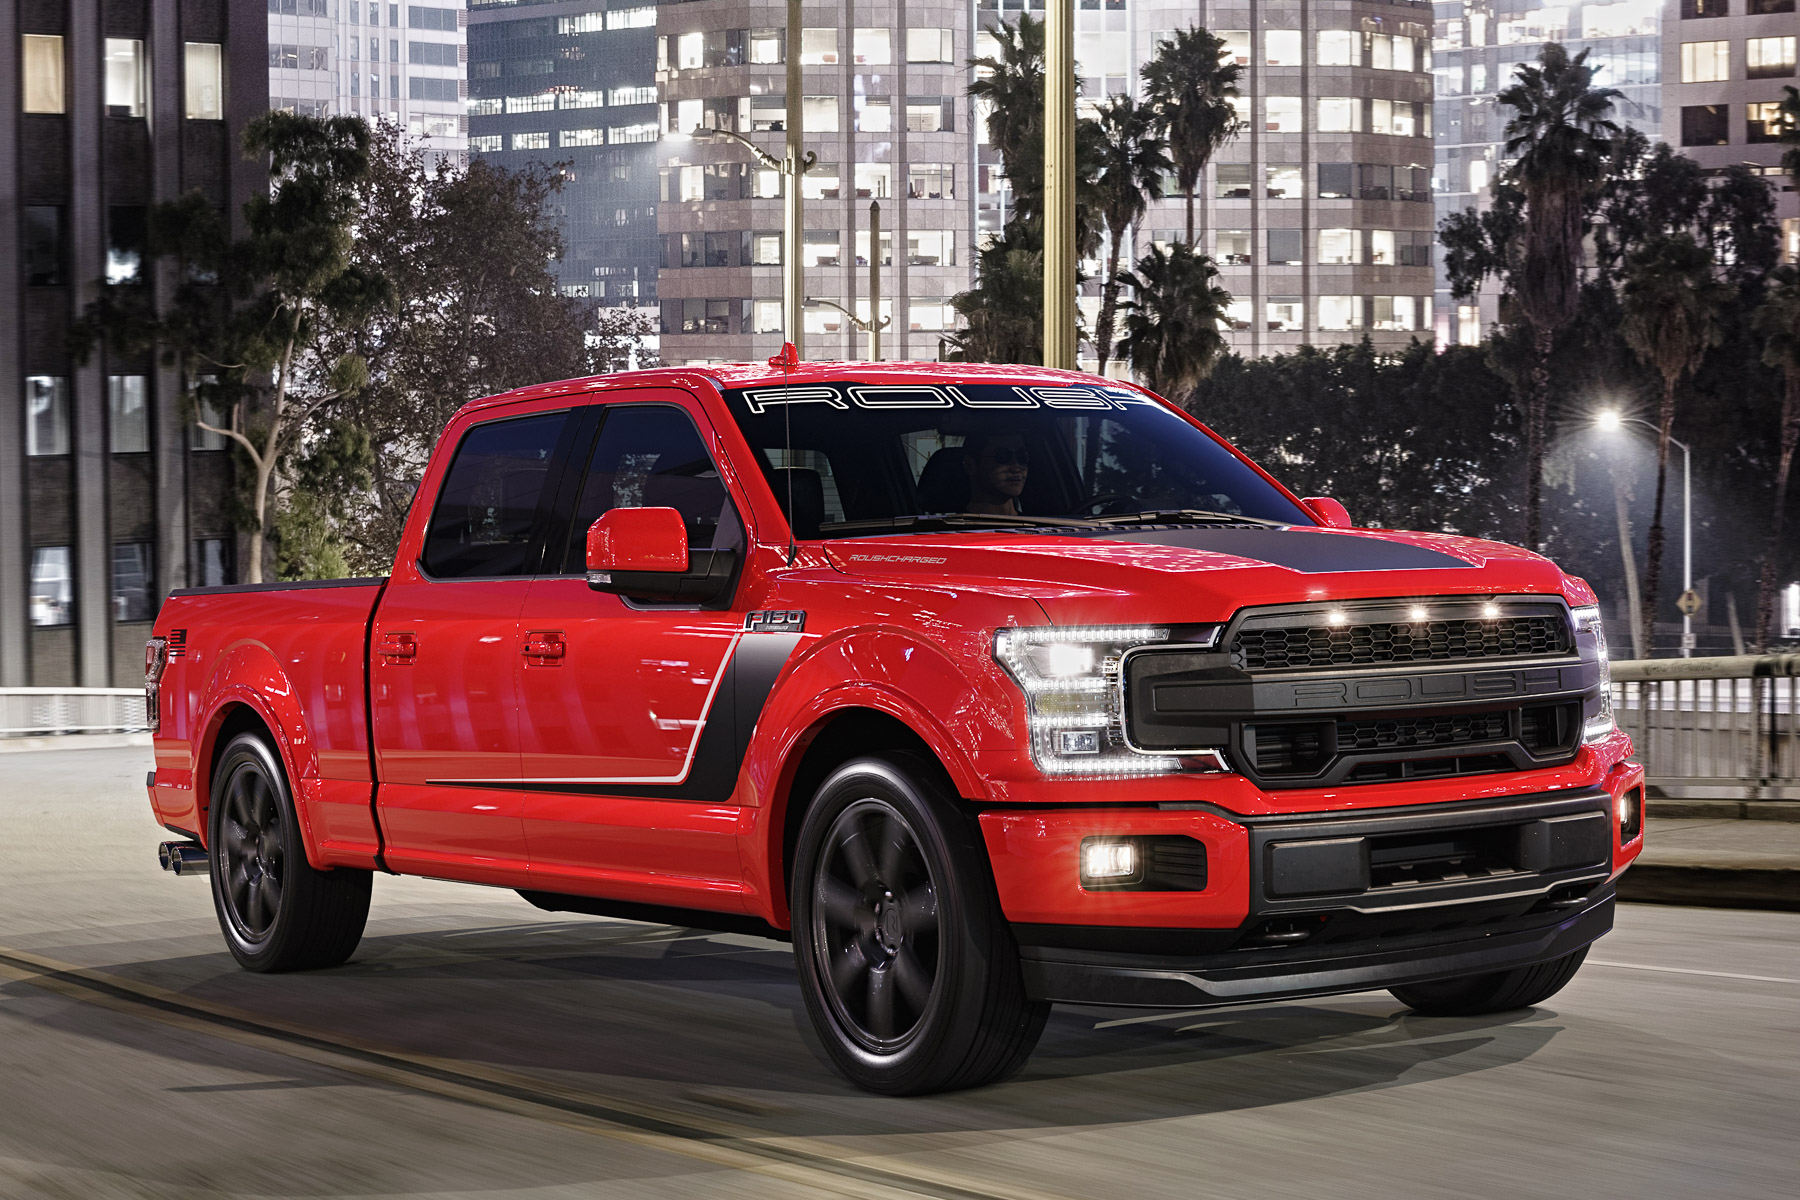 ROUSH F-150 Nitemare supercharged V8 truck